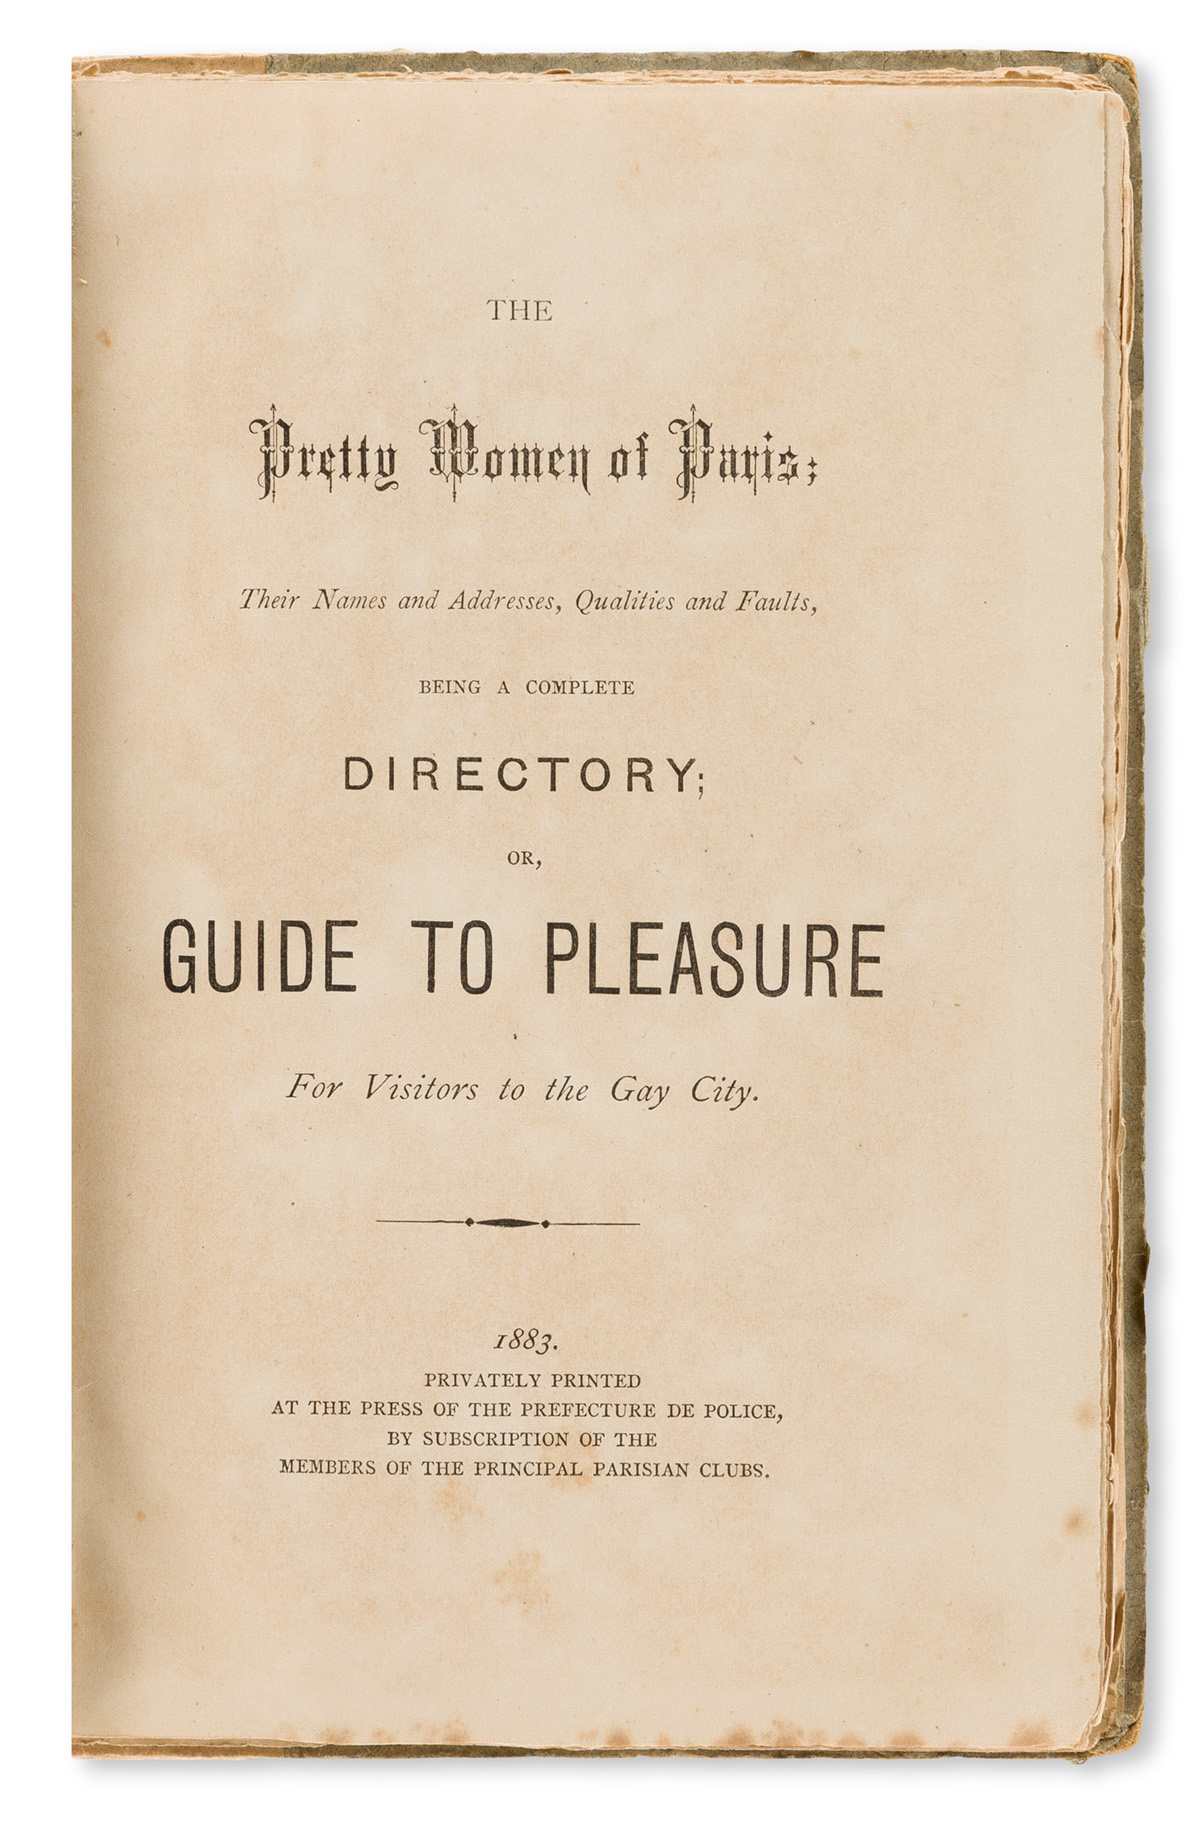 The Pretty Women of Paris: their Names and Address, Qualities and Faults, Being a Complete Directory; or Guide to Pleasure for Visitors